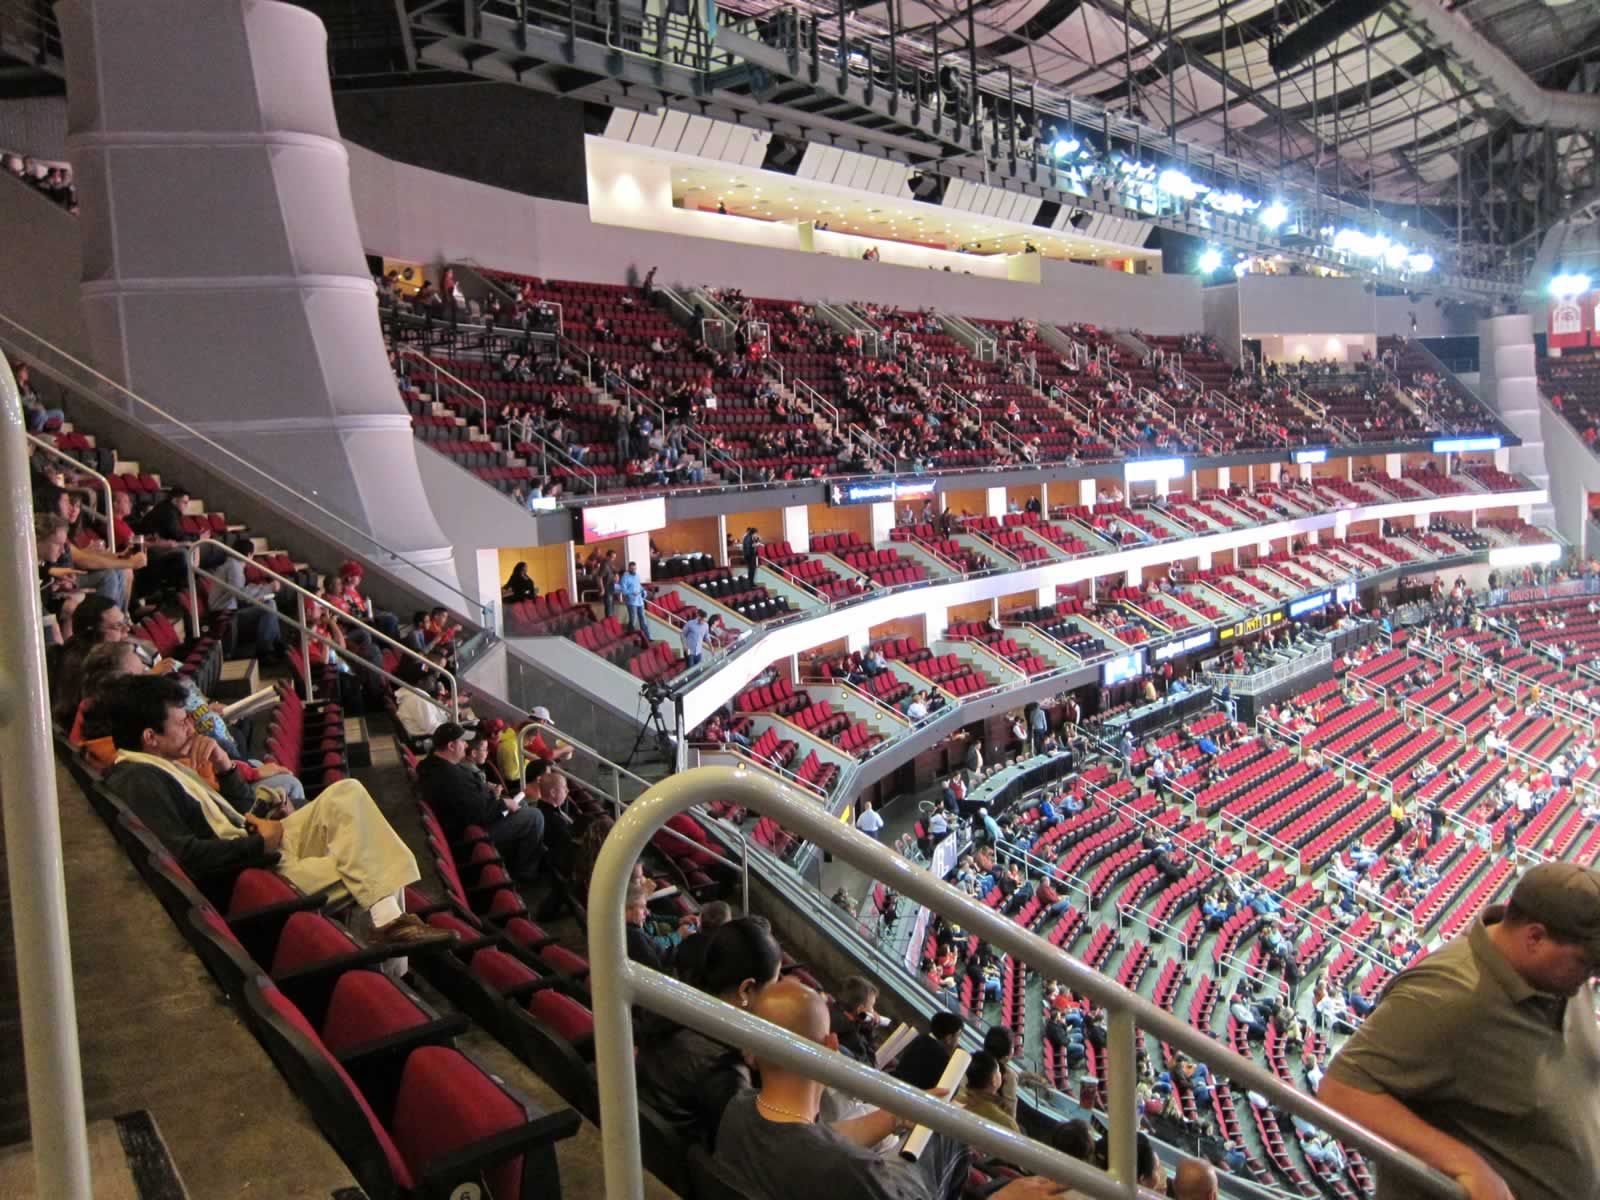 Top 156+ images houston toyota center seating view - In.thptnganamst.edu.vn